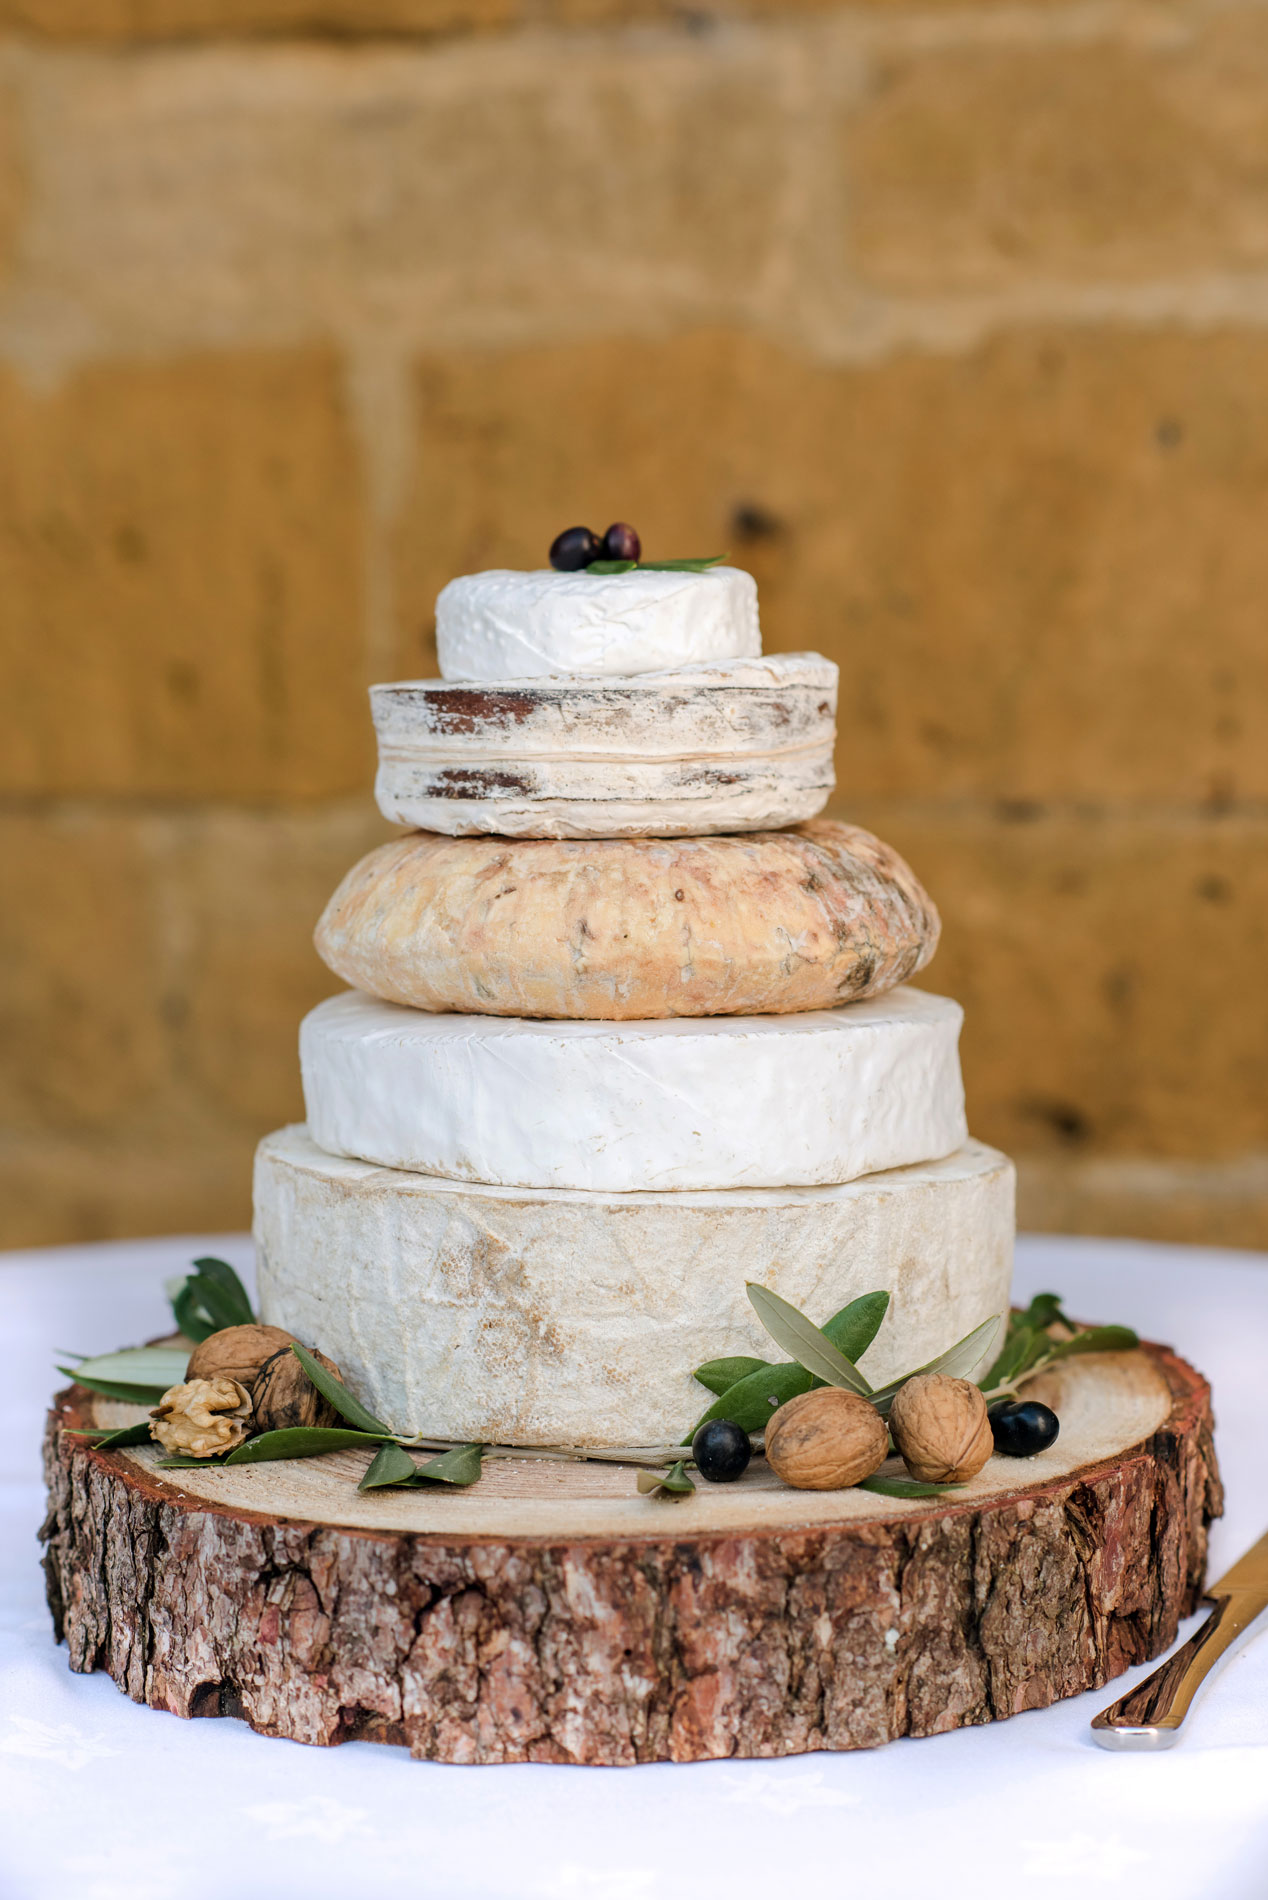 Cotswold-Cheese-Nov-2018-36.jpg